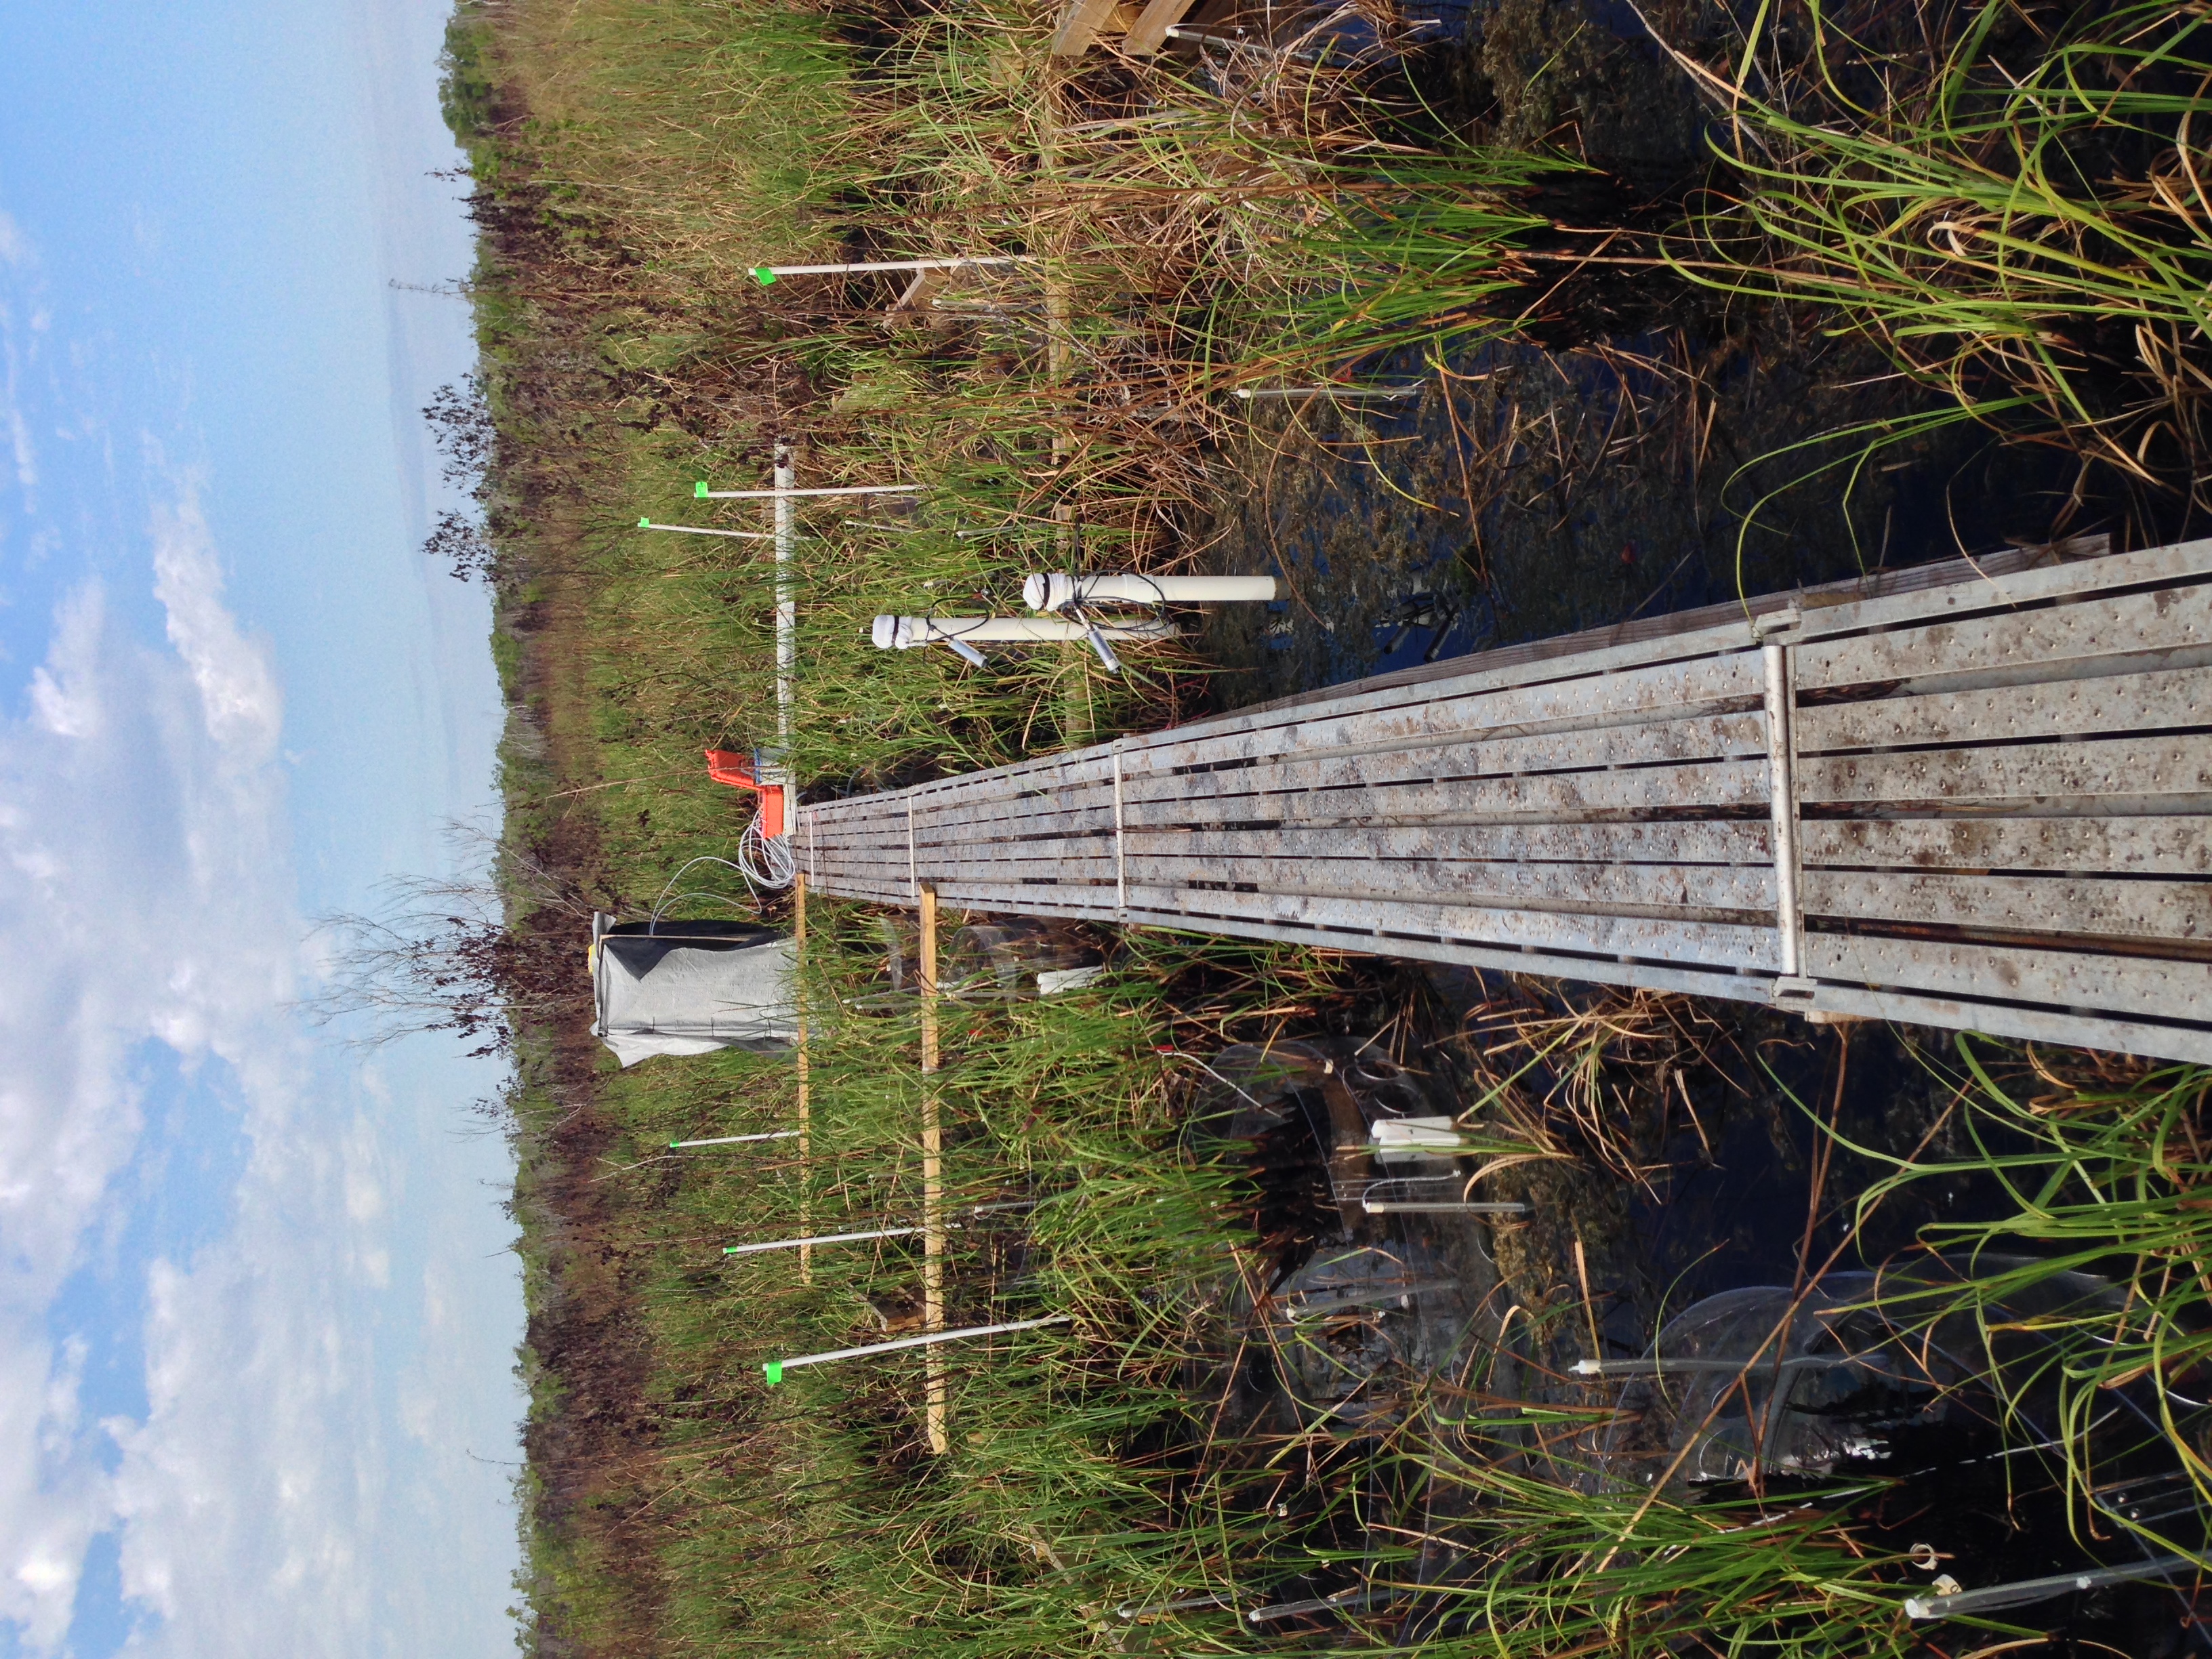 A flux chamber collecting gaseous carbon measurements at a brackish water site